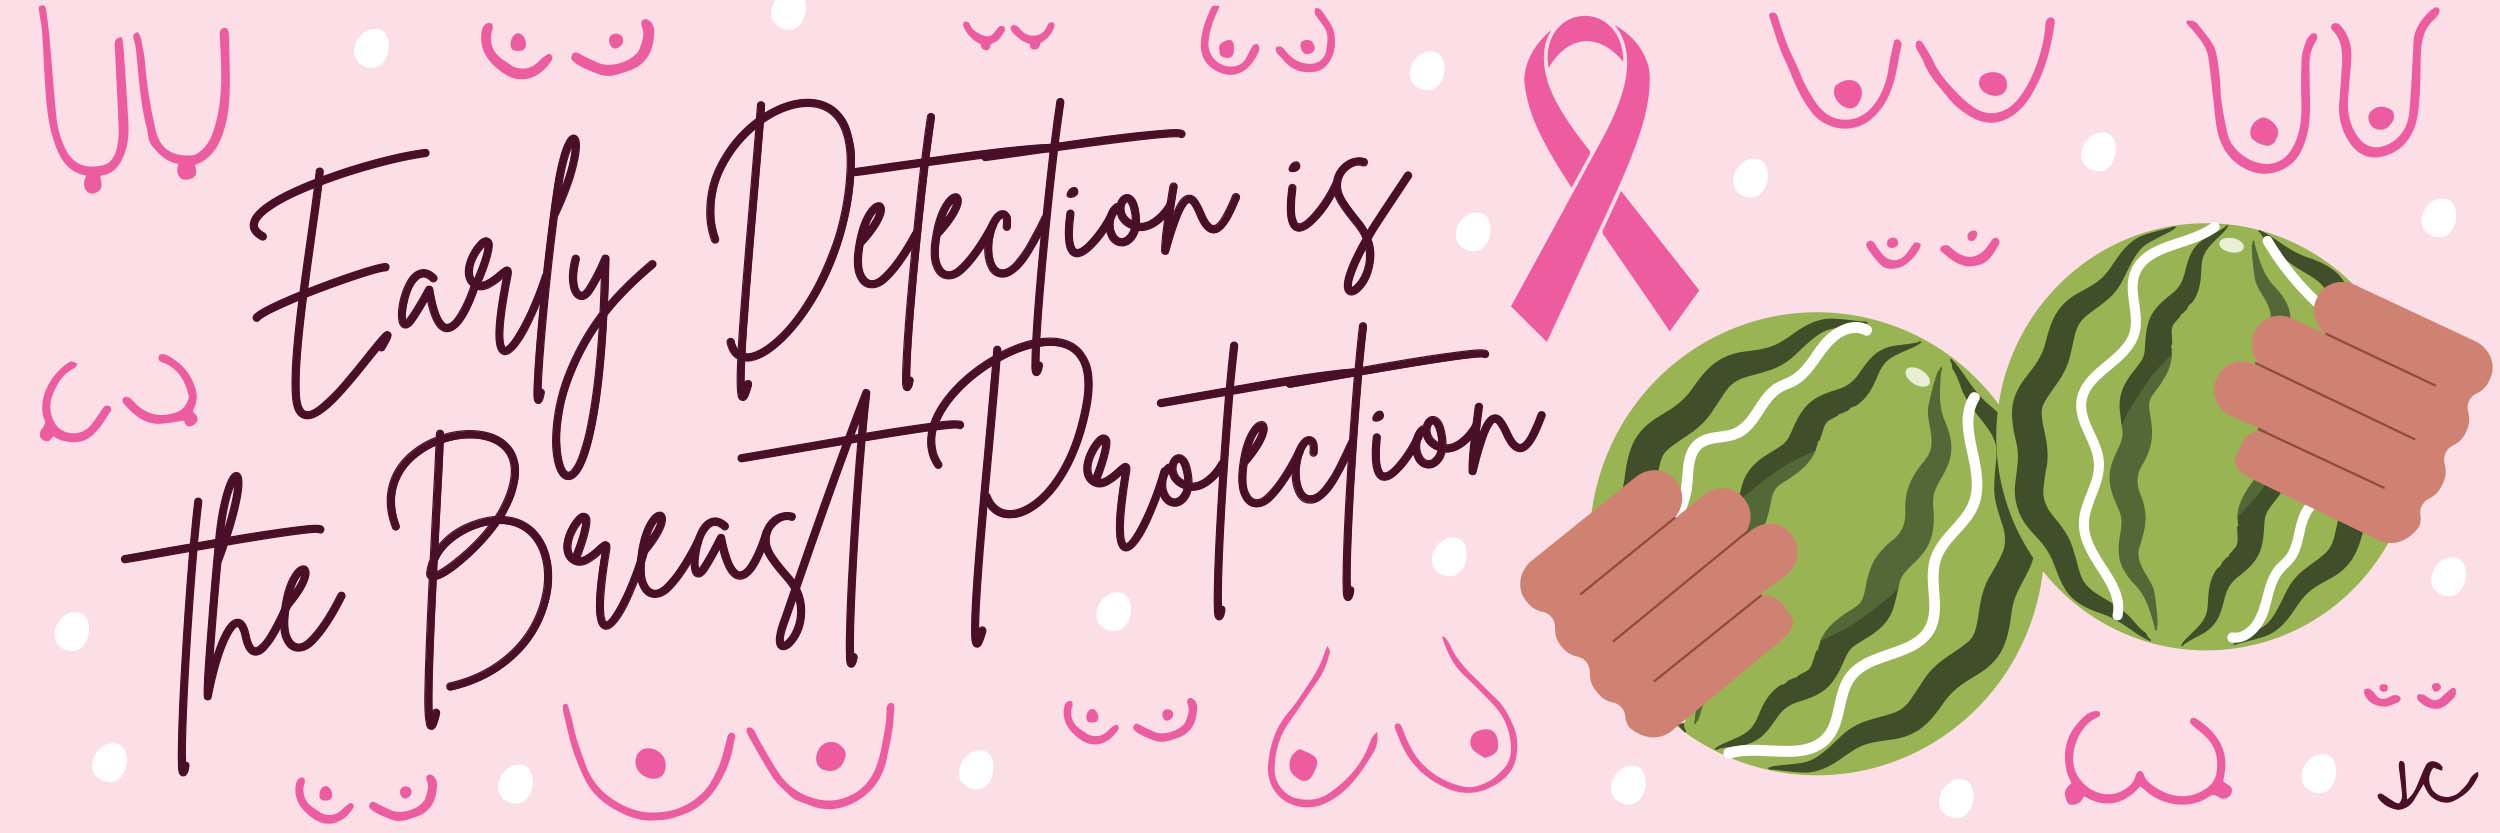 Breast Cancer Awareness - Why Early Detection is the Breast Protection